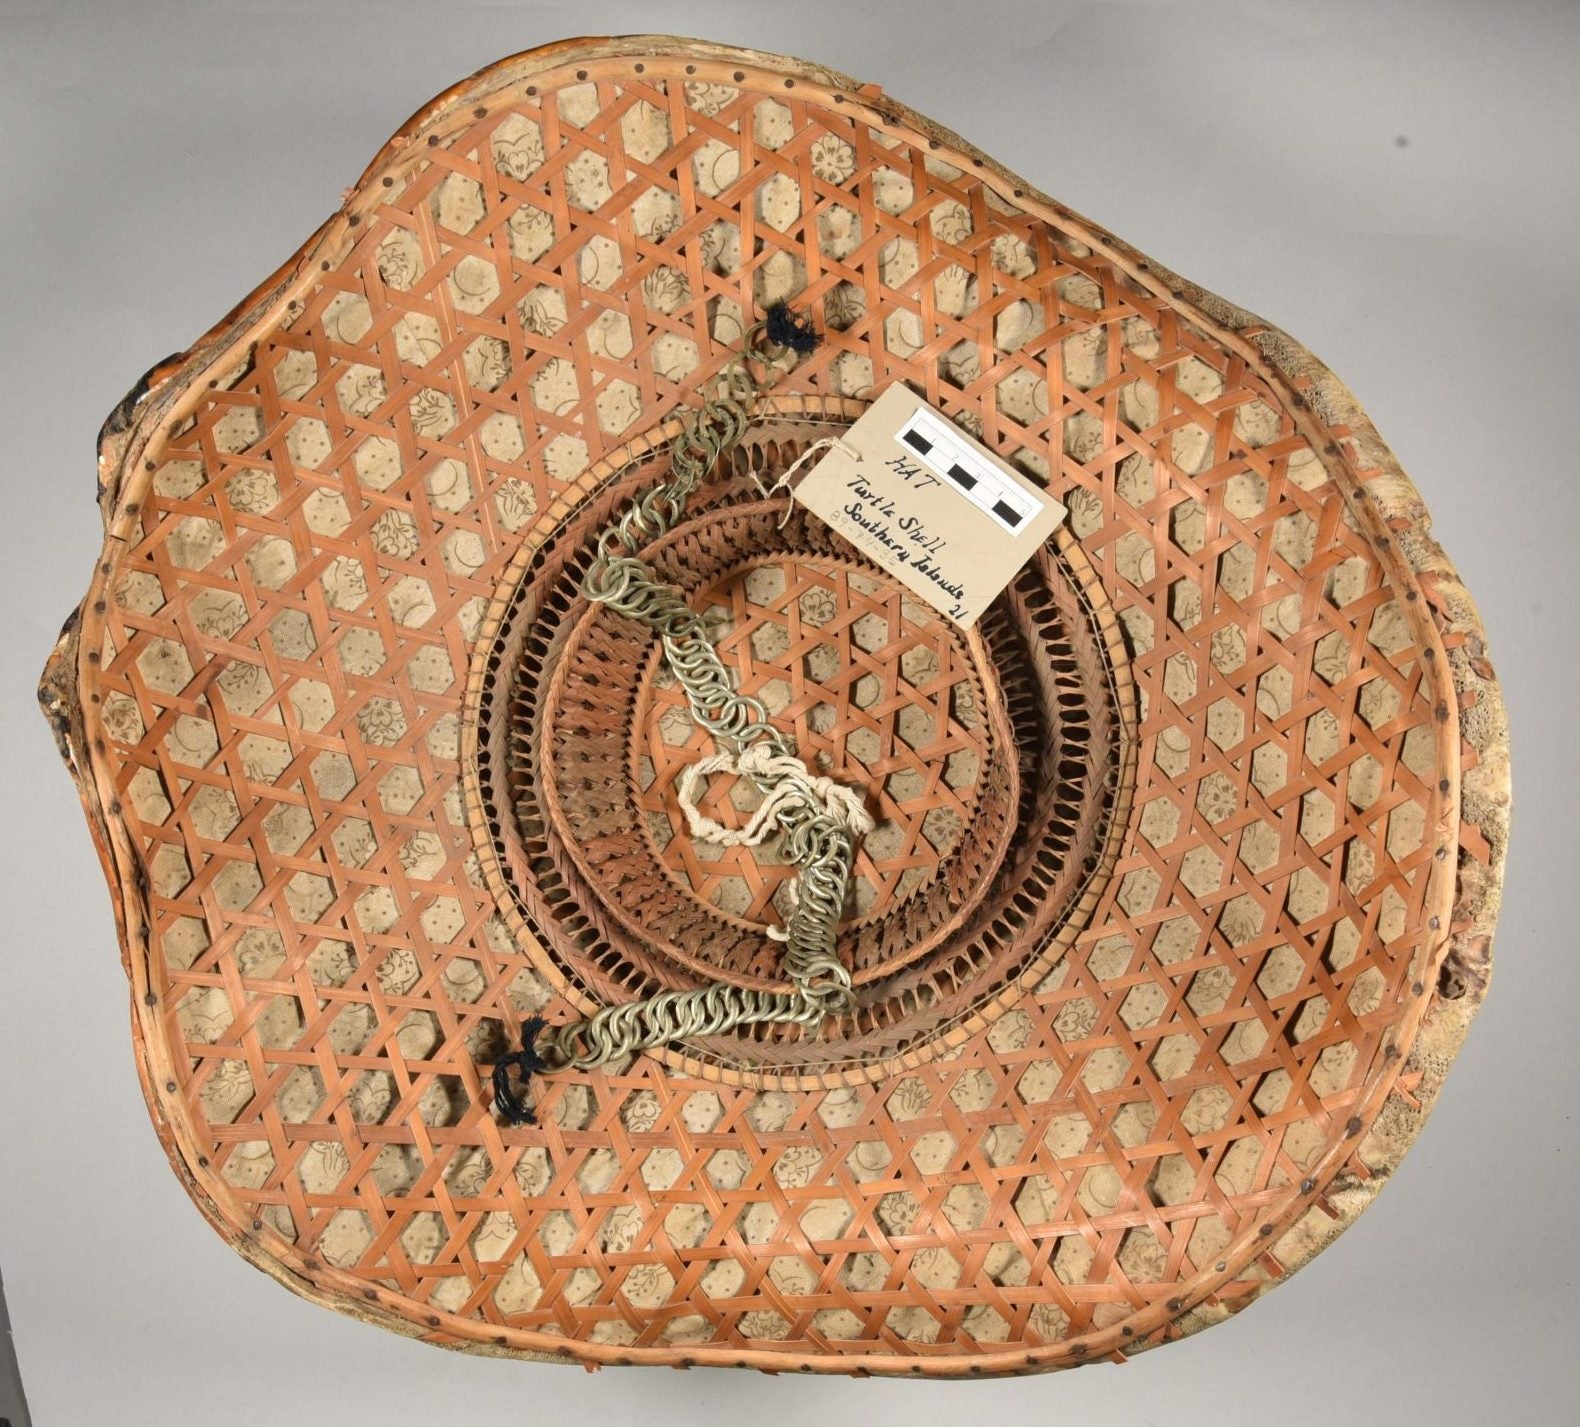 The bottom side of the turtle shell salakot. It has rattan weaving on it, along with a chain neckstrap attached with dark string. The tag attached to the hat reads "HAT; Turtle Shell; Southern Islands; 21"